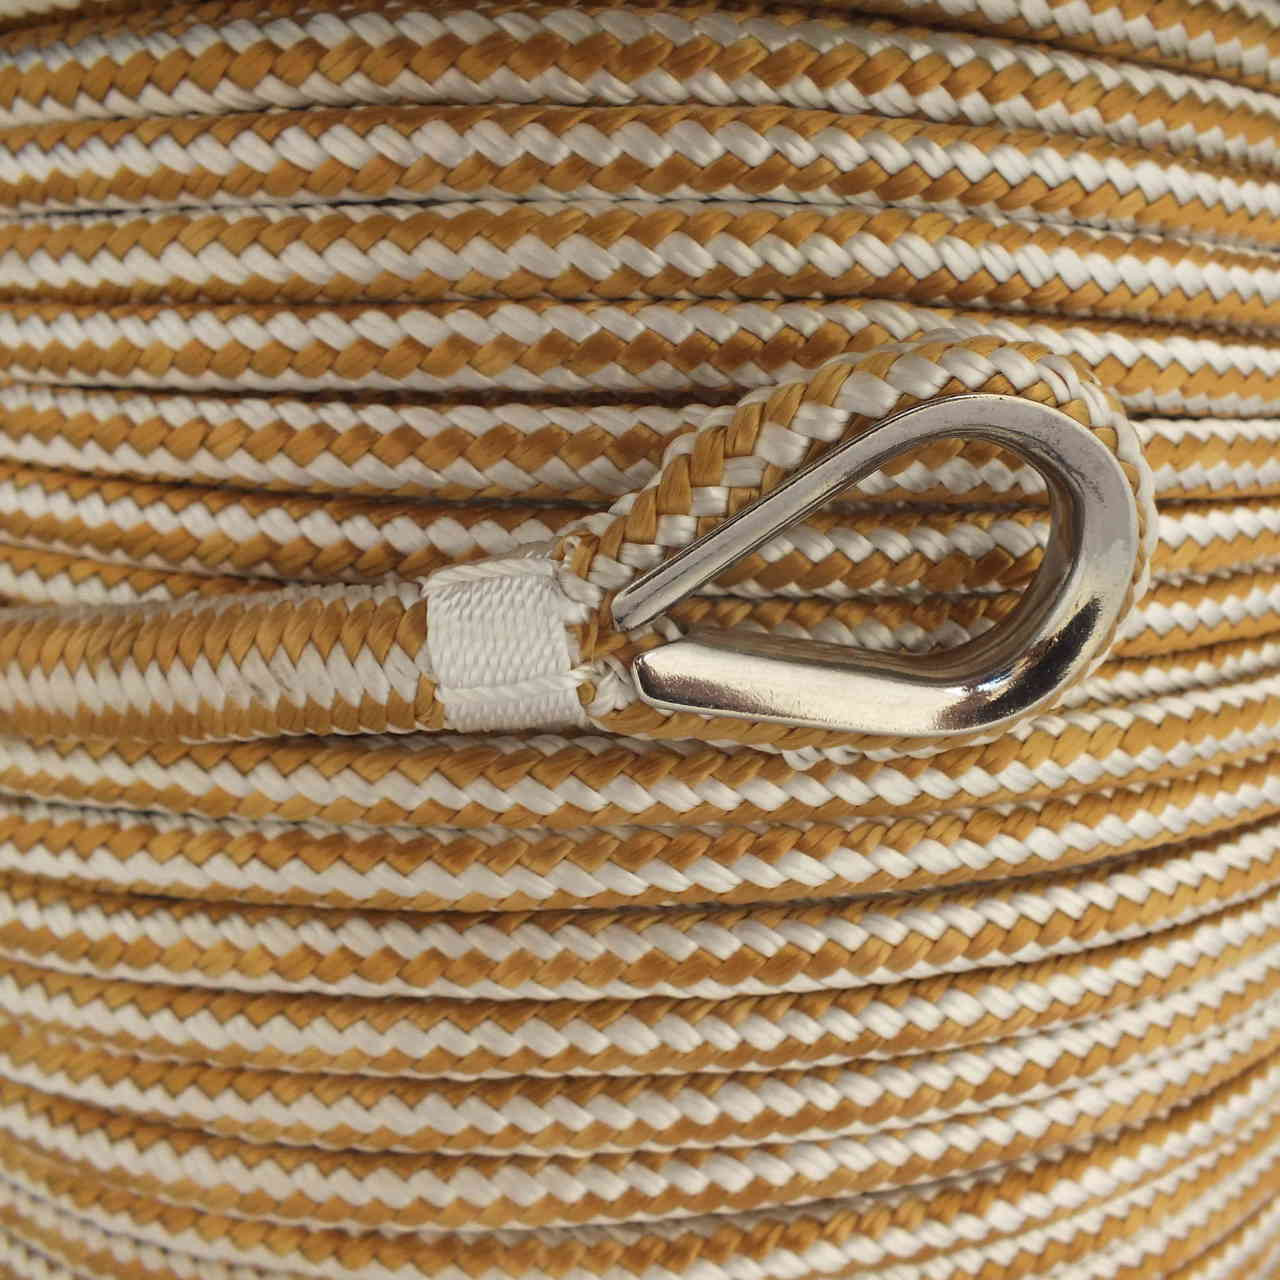 8mm x 150M Double Braid Nylon Anchor Rope, Great for Drum Winches, Super Strong